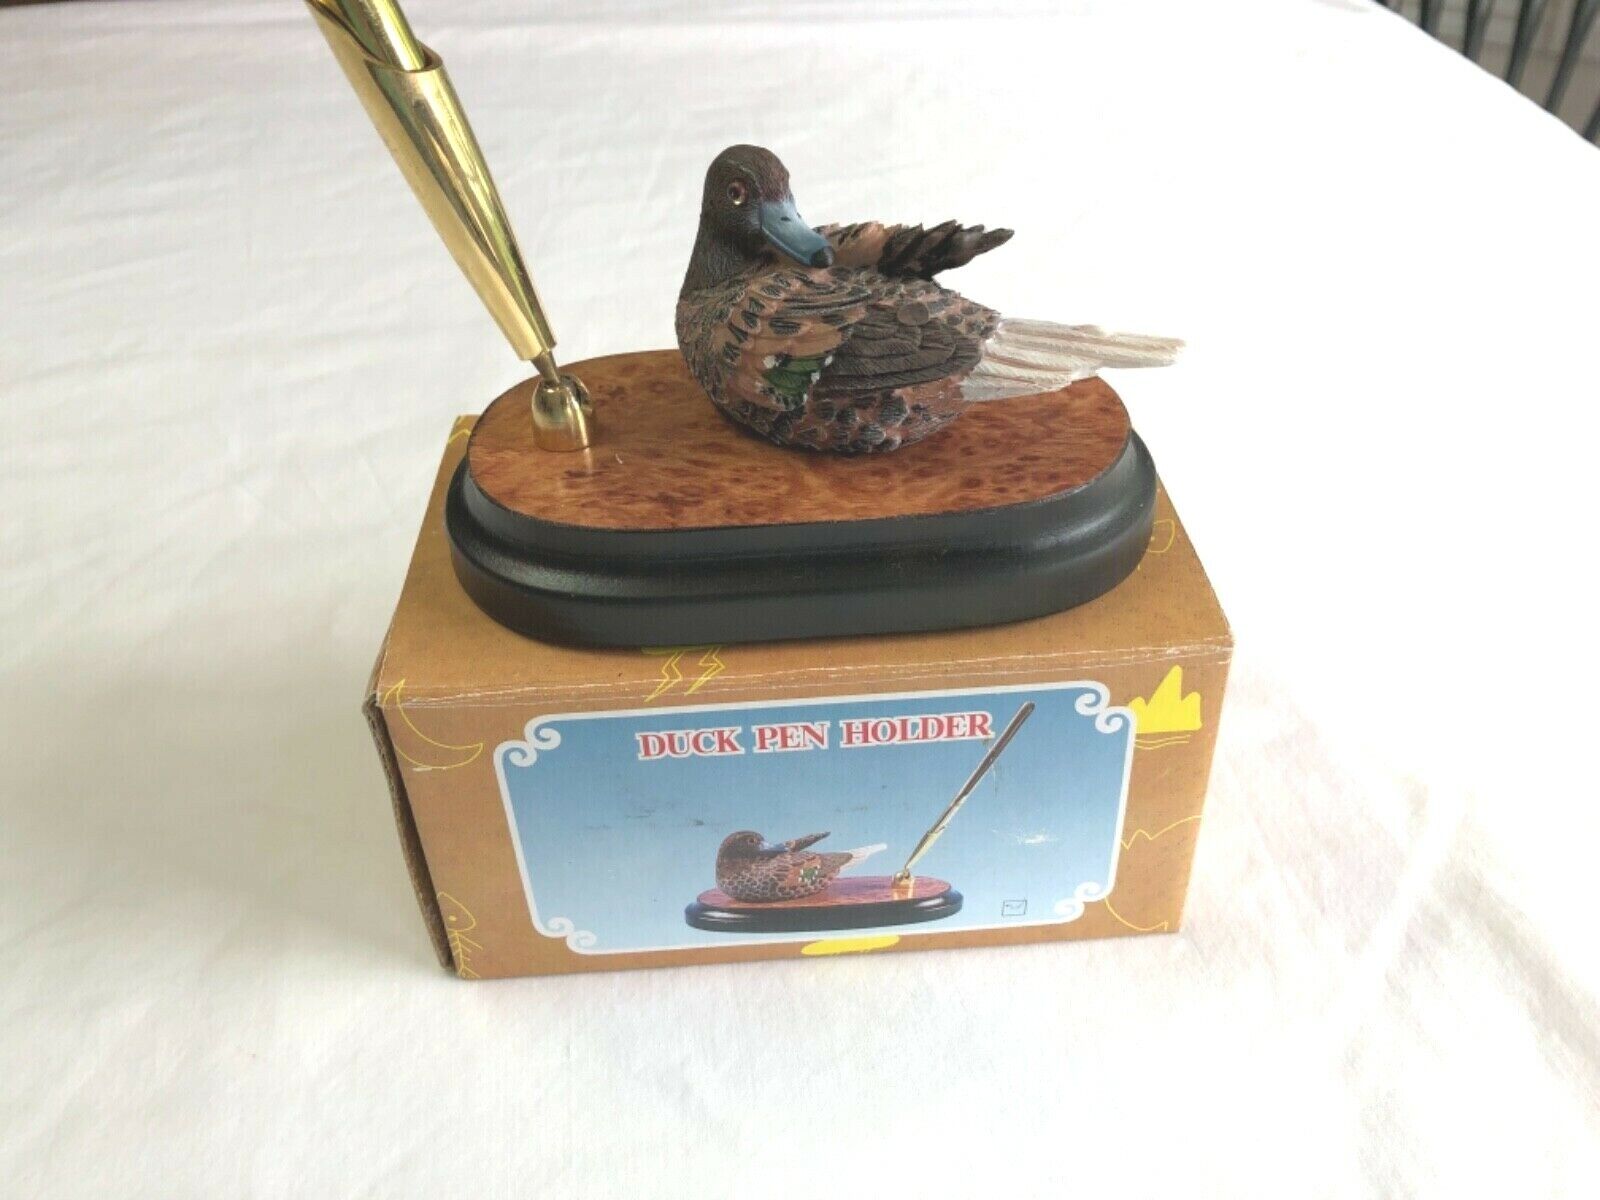 DUCK PEN HOLDER WITH PEN NEW OLD STOCK IN BOX FOR DESK DISPLAY A6